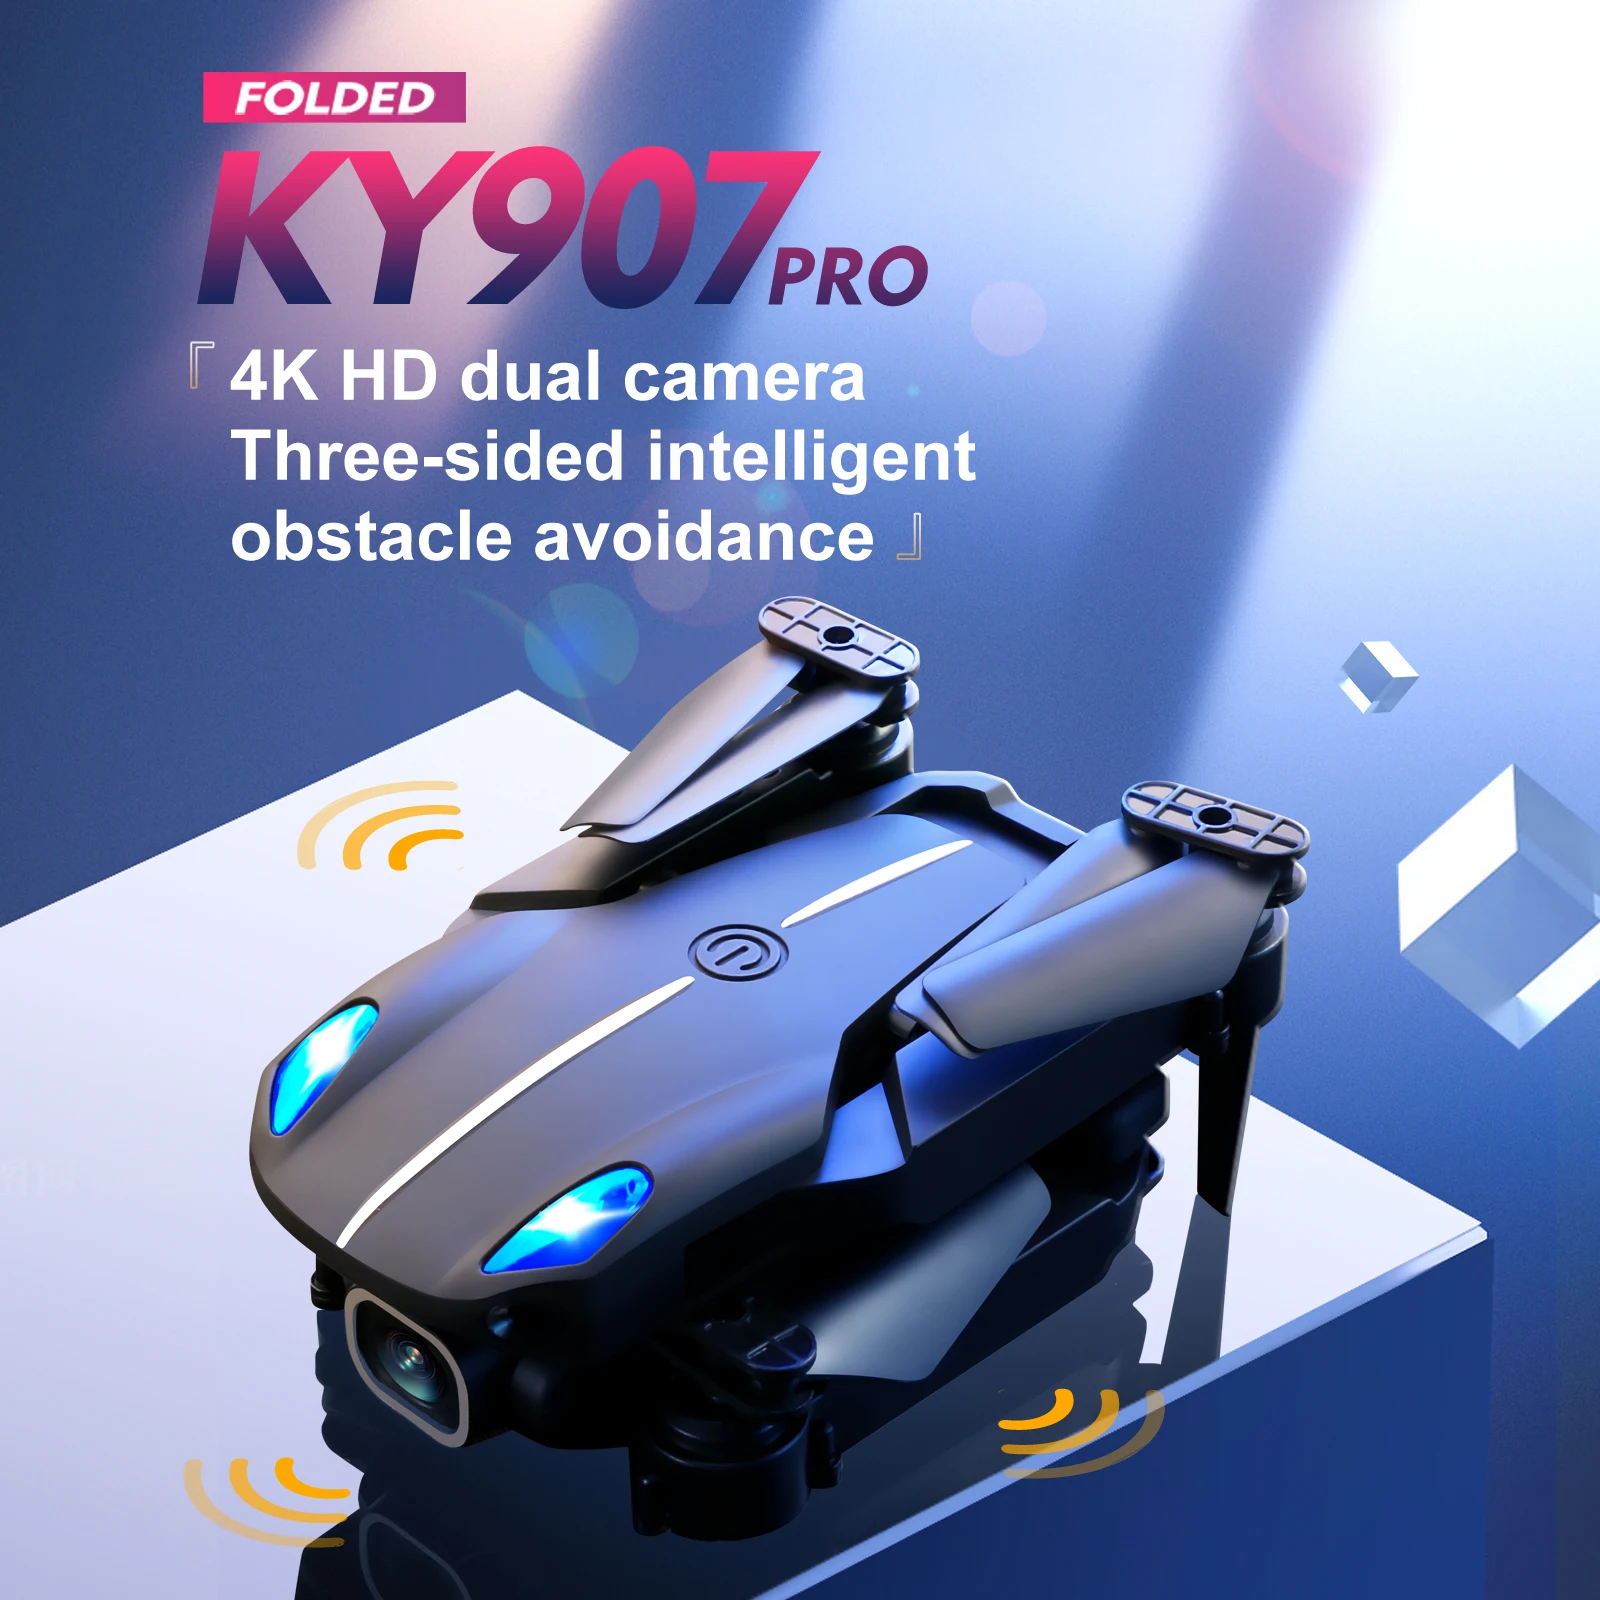 mini rc helicopter Nwe KY907 Drone 4K HD Dual Camera Wifi RC Drone FPV Automatic Obstacle Avoidance Quadcopter Folding Remote Control Aircraft remote helicopter price